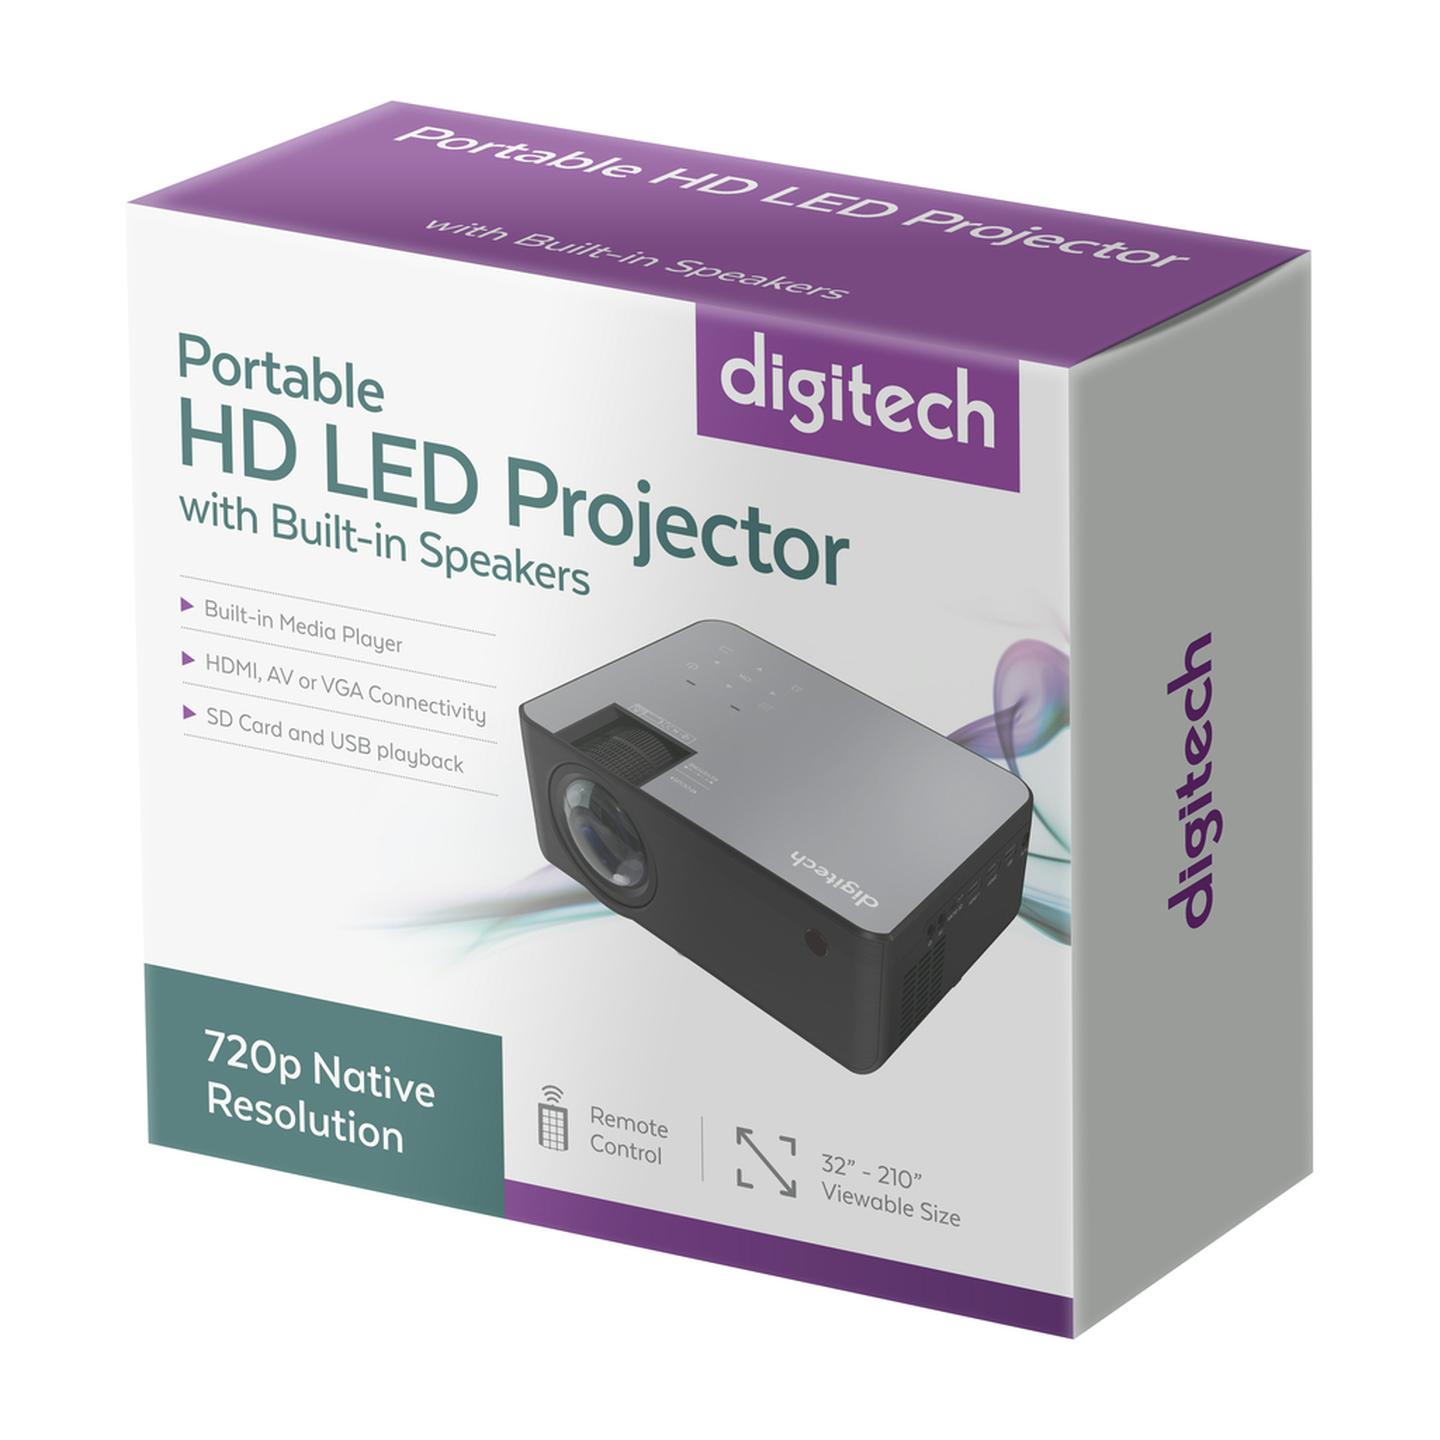 Digitech HD Projector with HDMI USB and VGA Inputs and Built-in Speakers